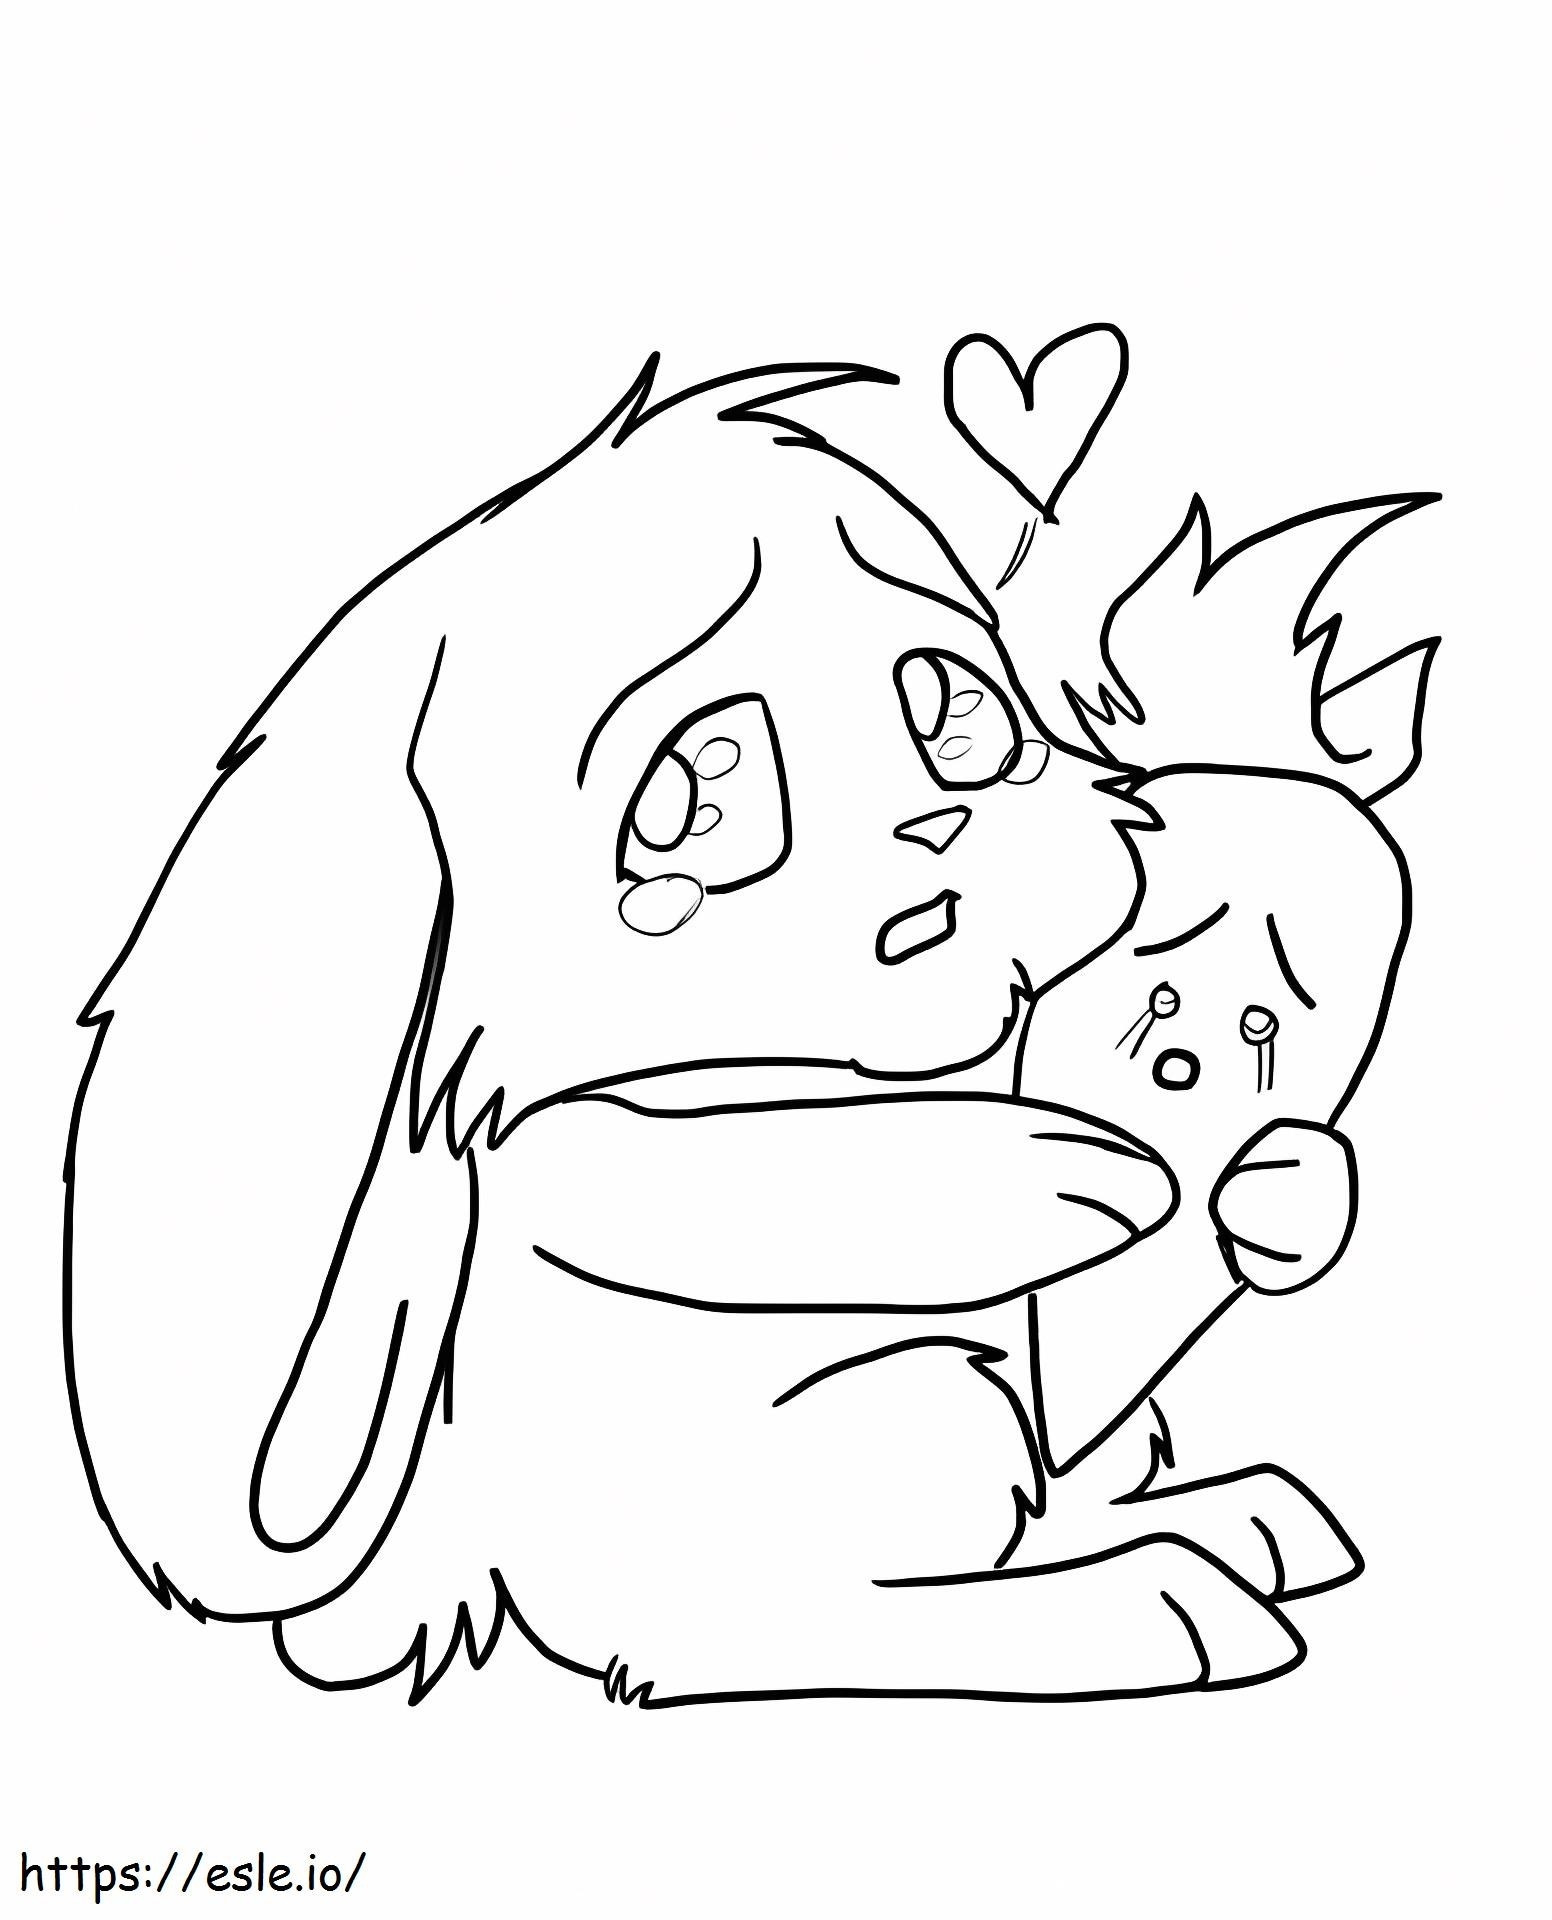 Chibi Rabbit With Carrot A4 coloring page